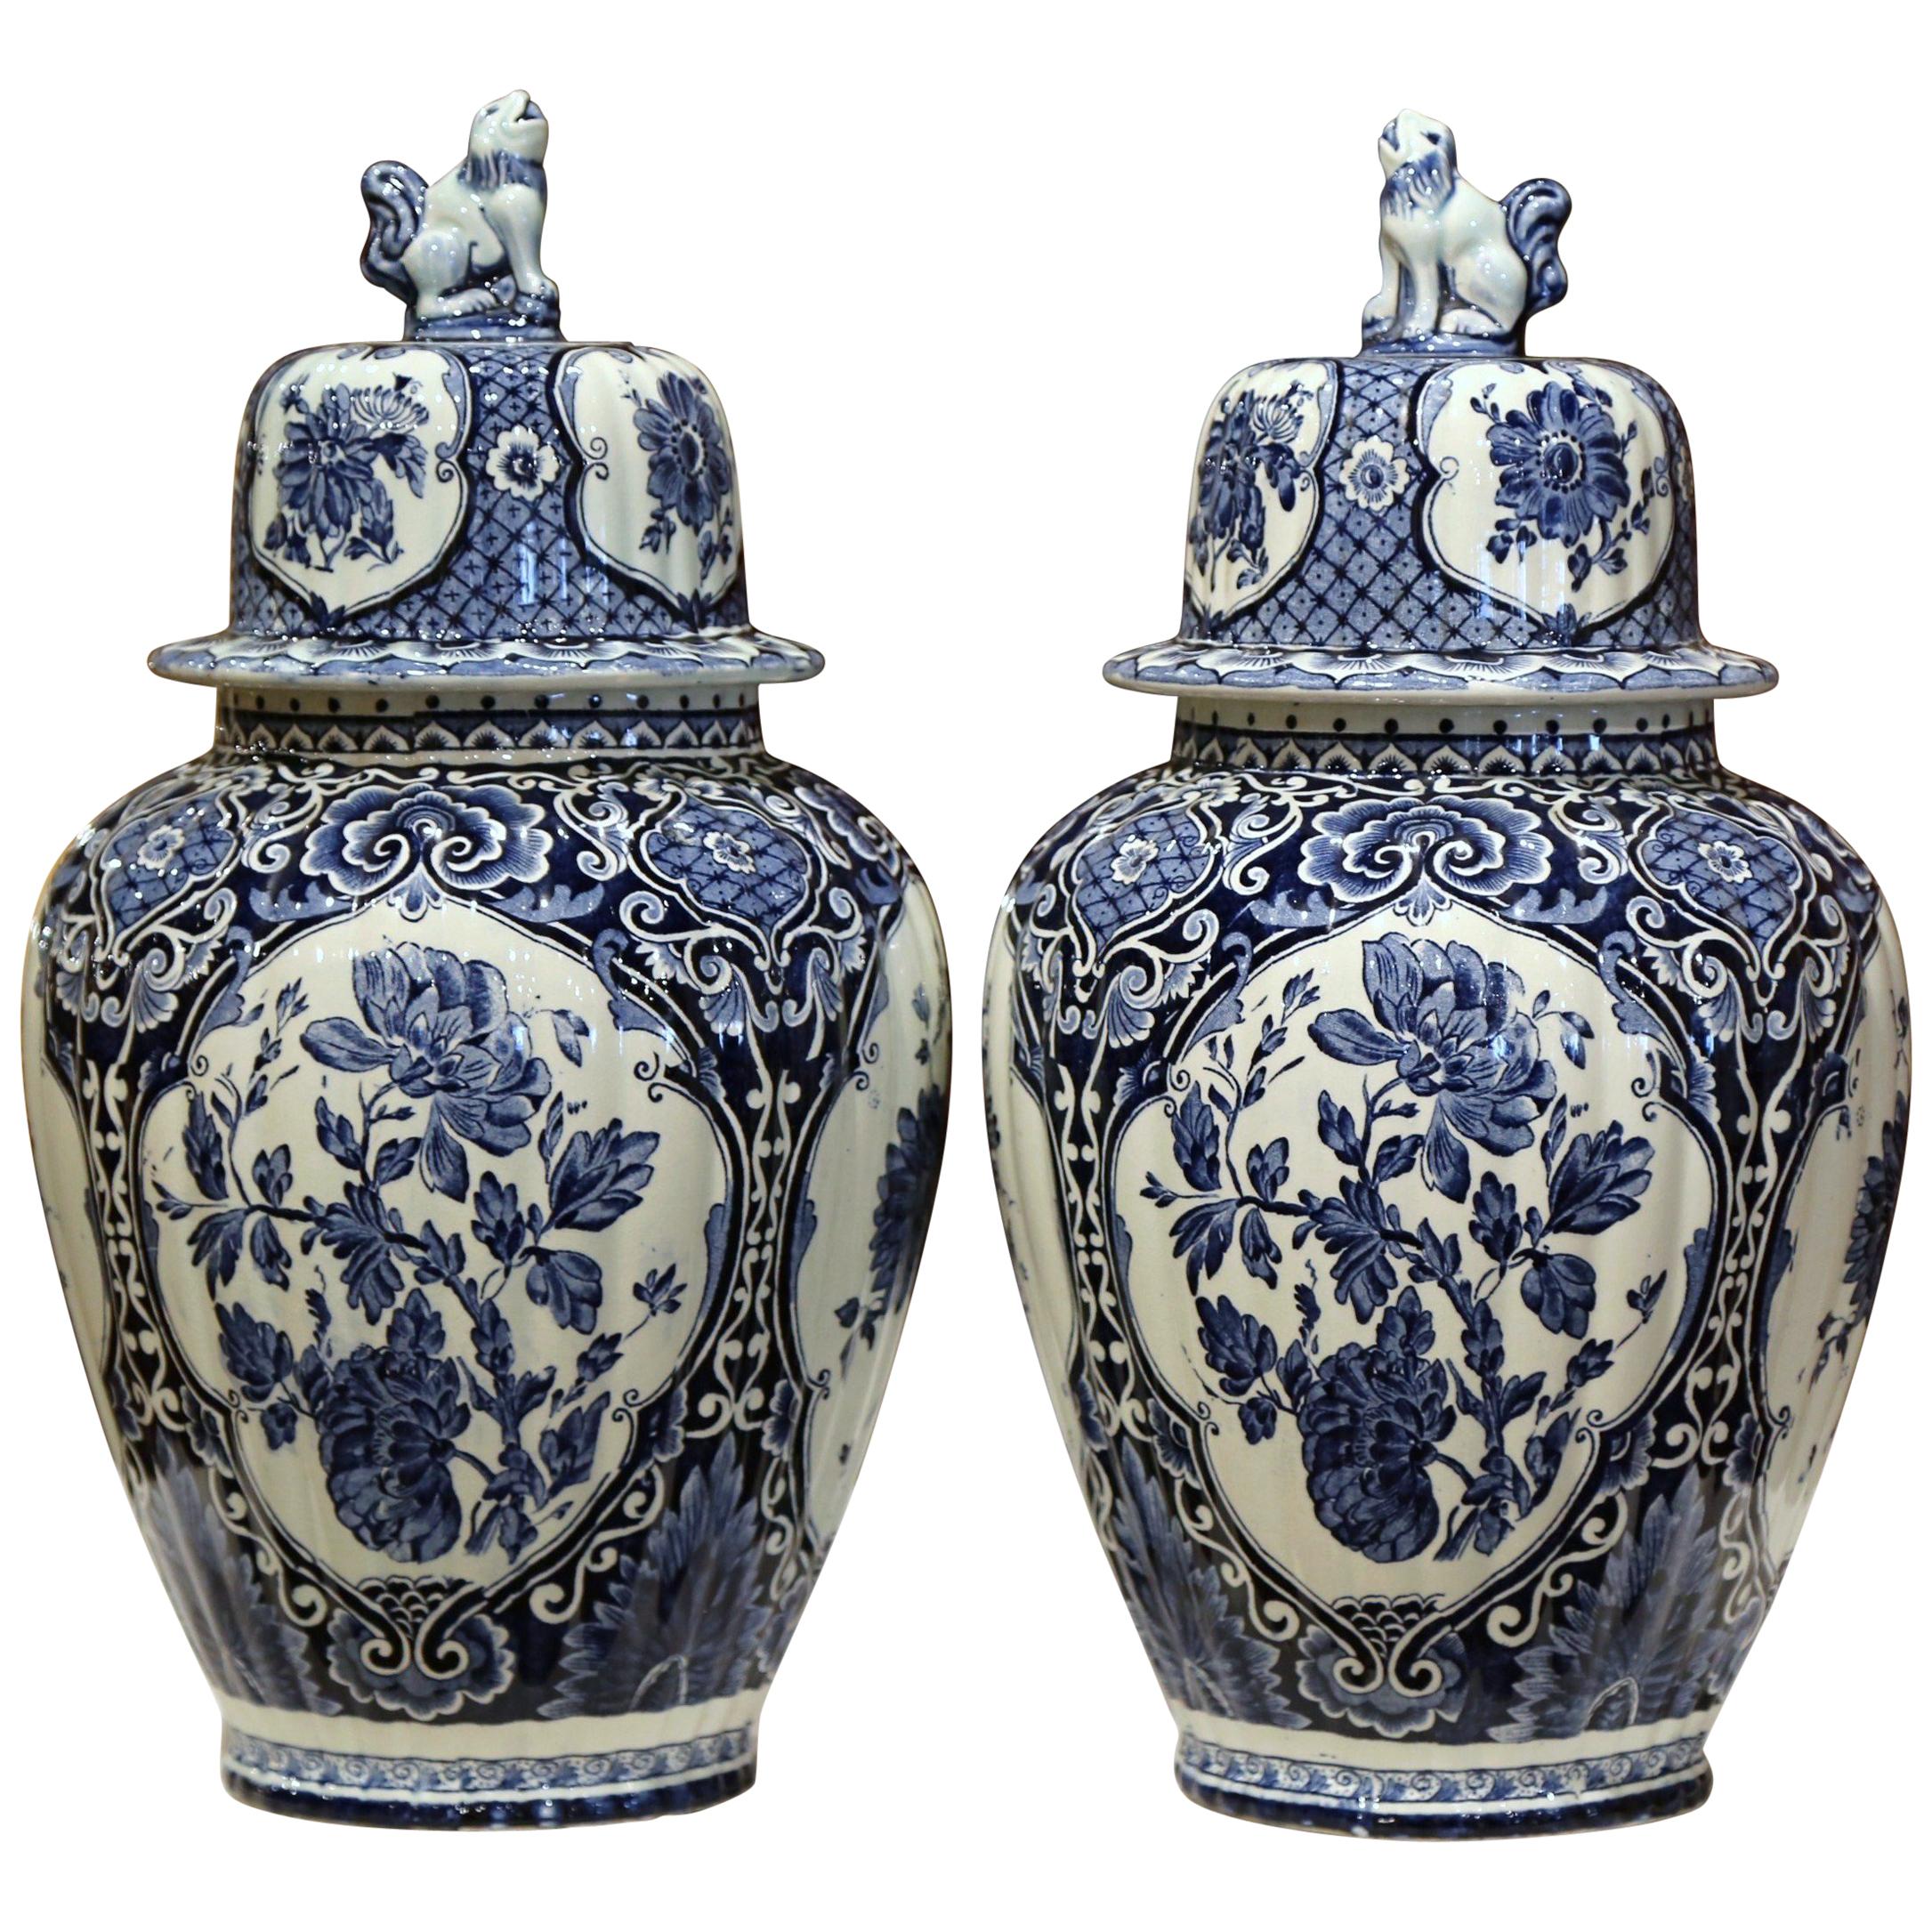 Pair of Mid-20th Century Dutch Blue and White Royal Maastricht Delft Ginger Jars